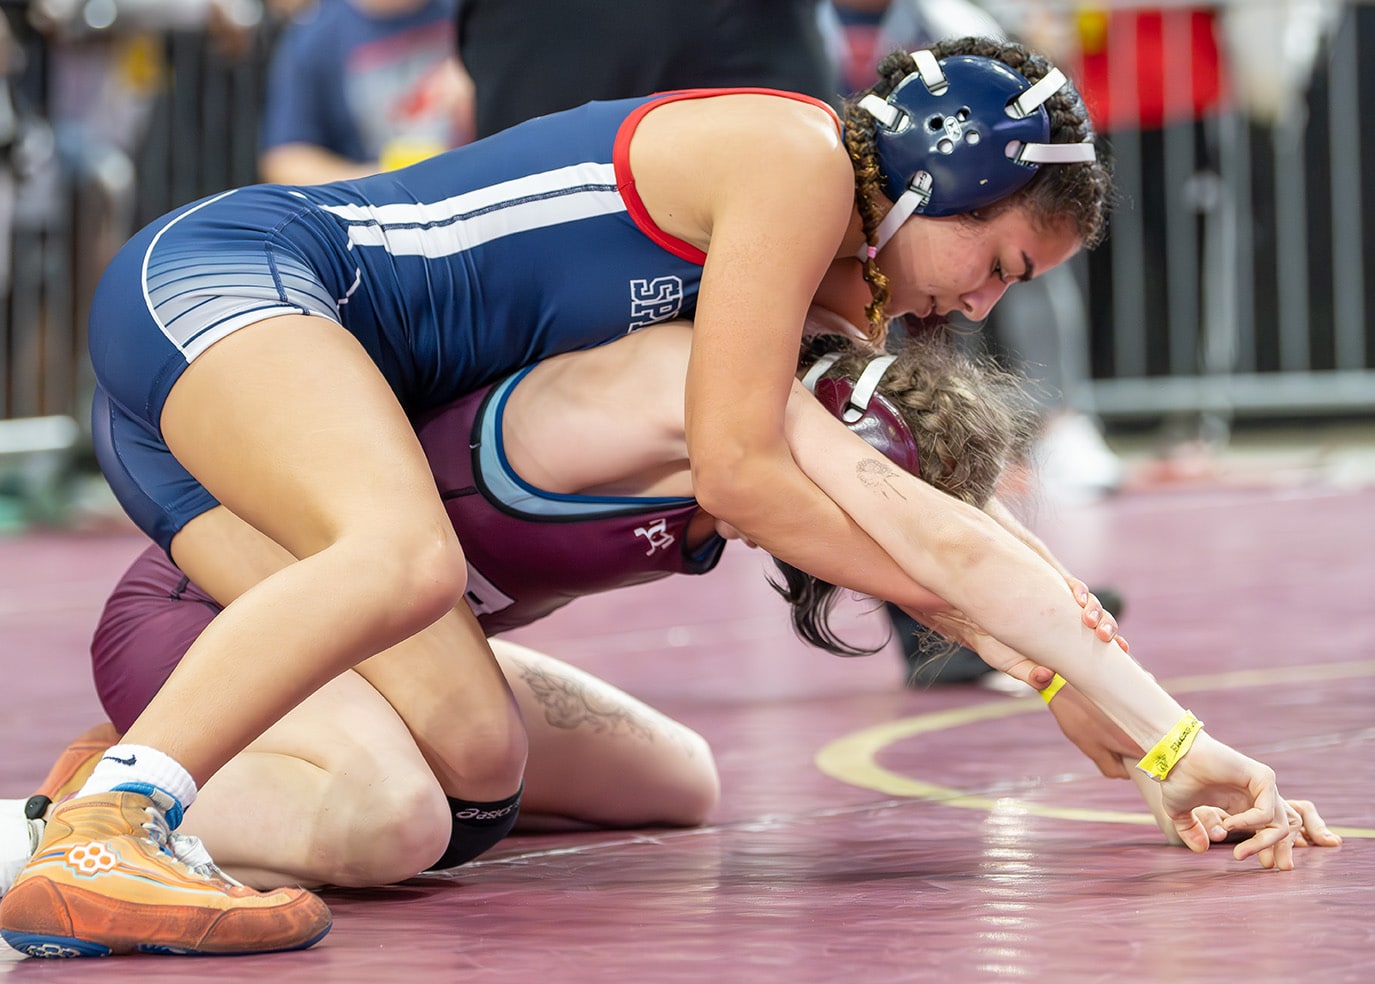 Springstead High 105 pound Gianella Walczak won over Riverdale’s Skyler Randolph by Fall in her second round match at the 2024 FHSAA State Championship in Kissimmee. [Photo by Joe DiCristofalo]